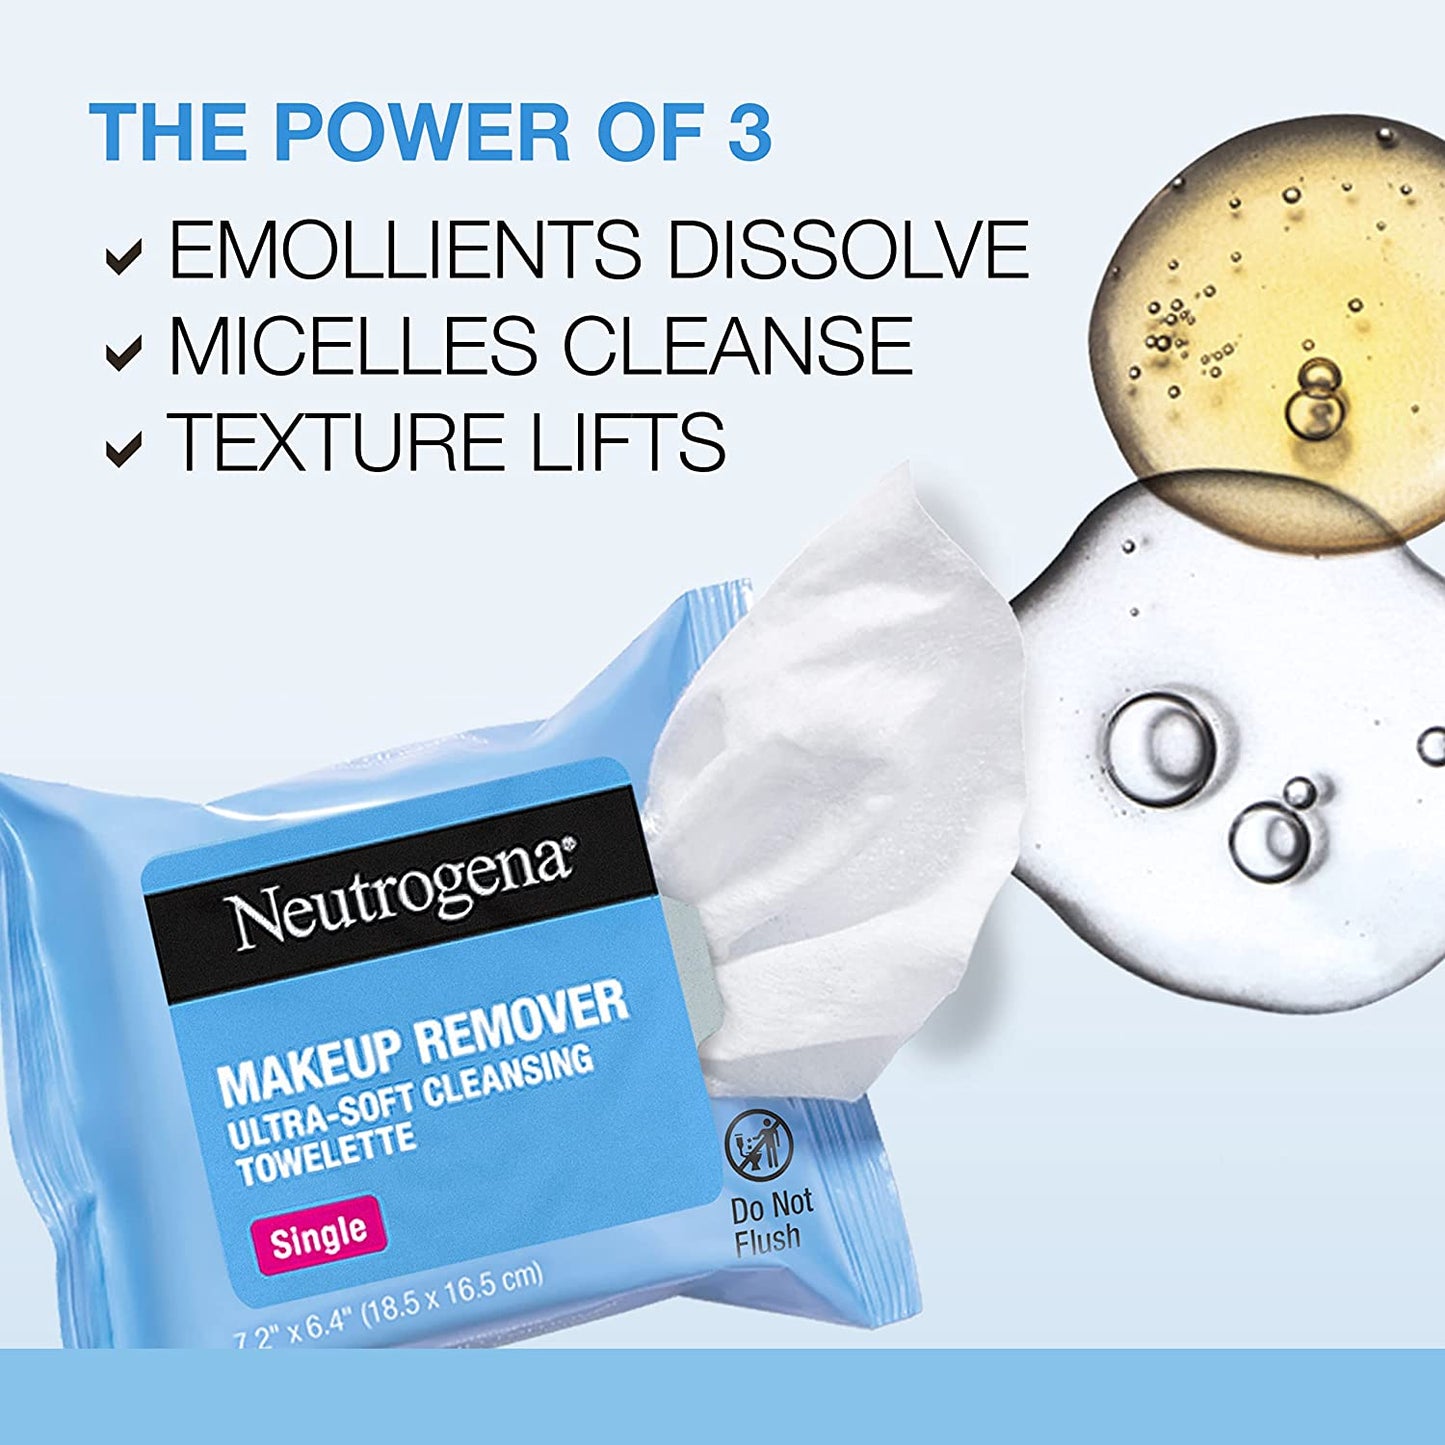 Neutrogena Makeup Remover Facial Cleansing Towelette Singles 20 counts